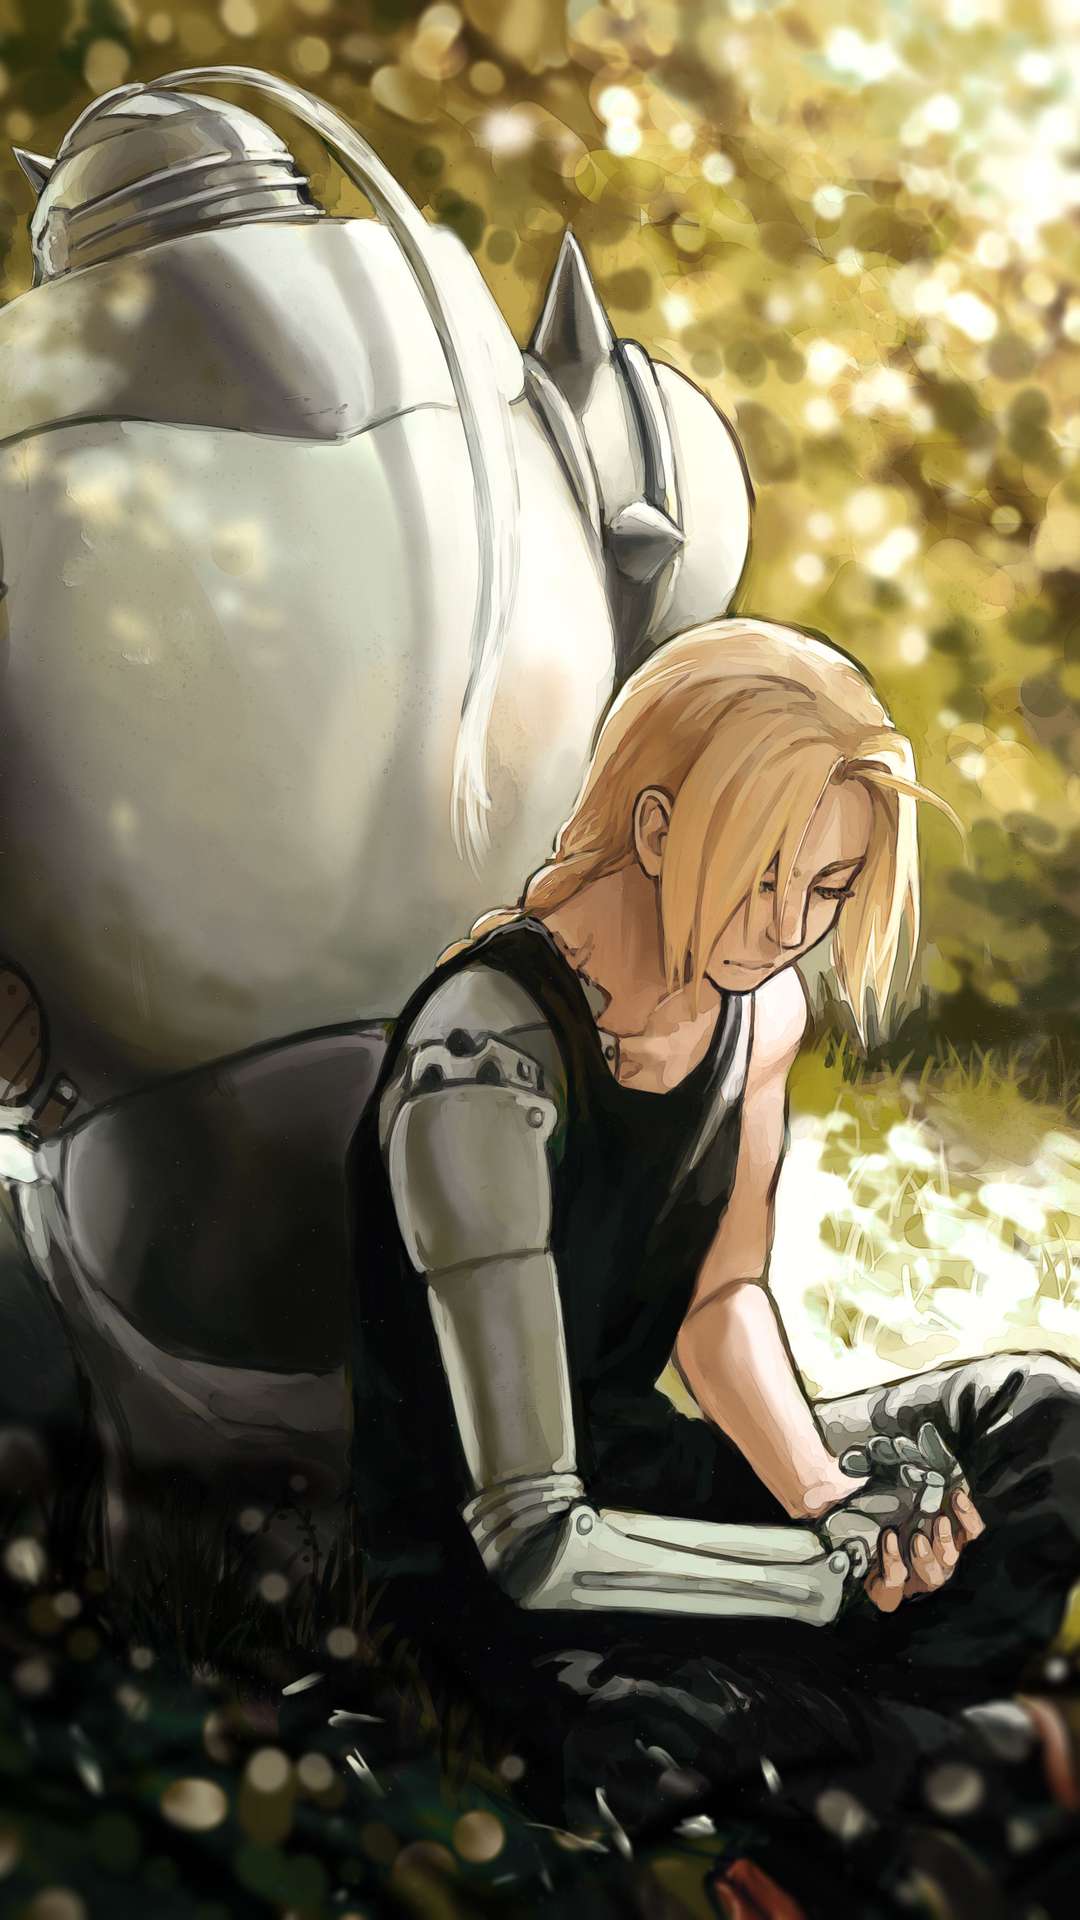 6+ Edward Elric Wallpapers for iPhone and Android by Lee Martin